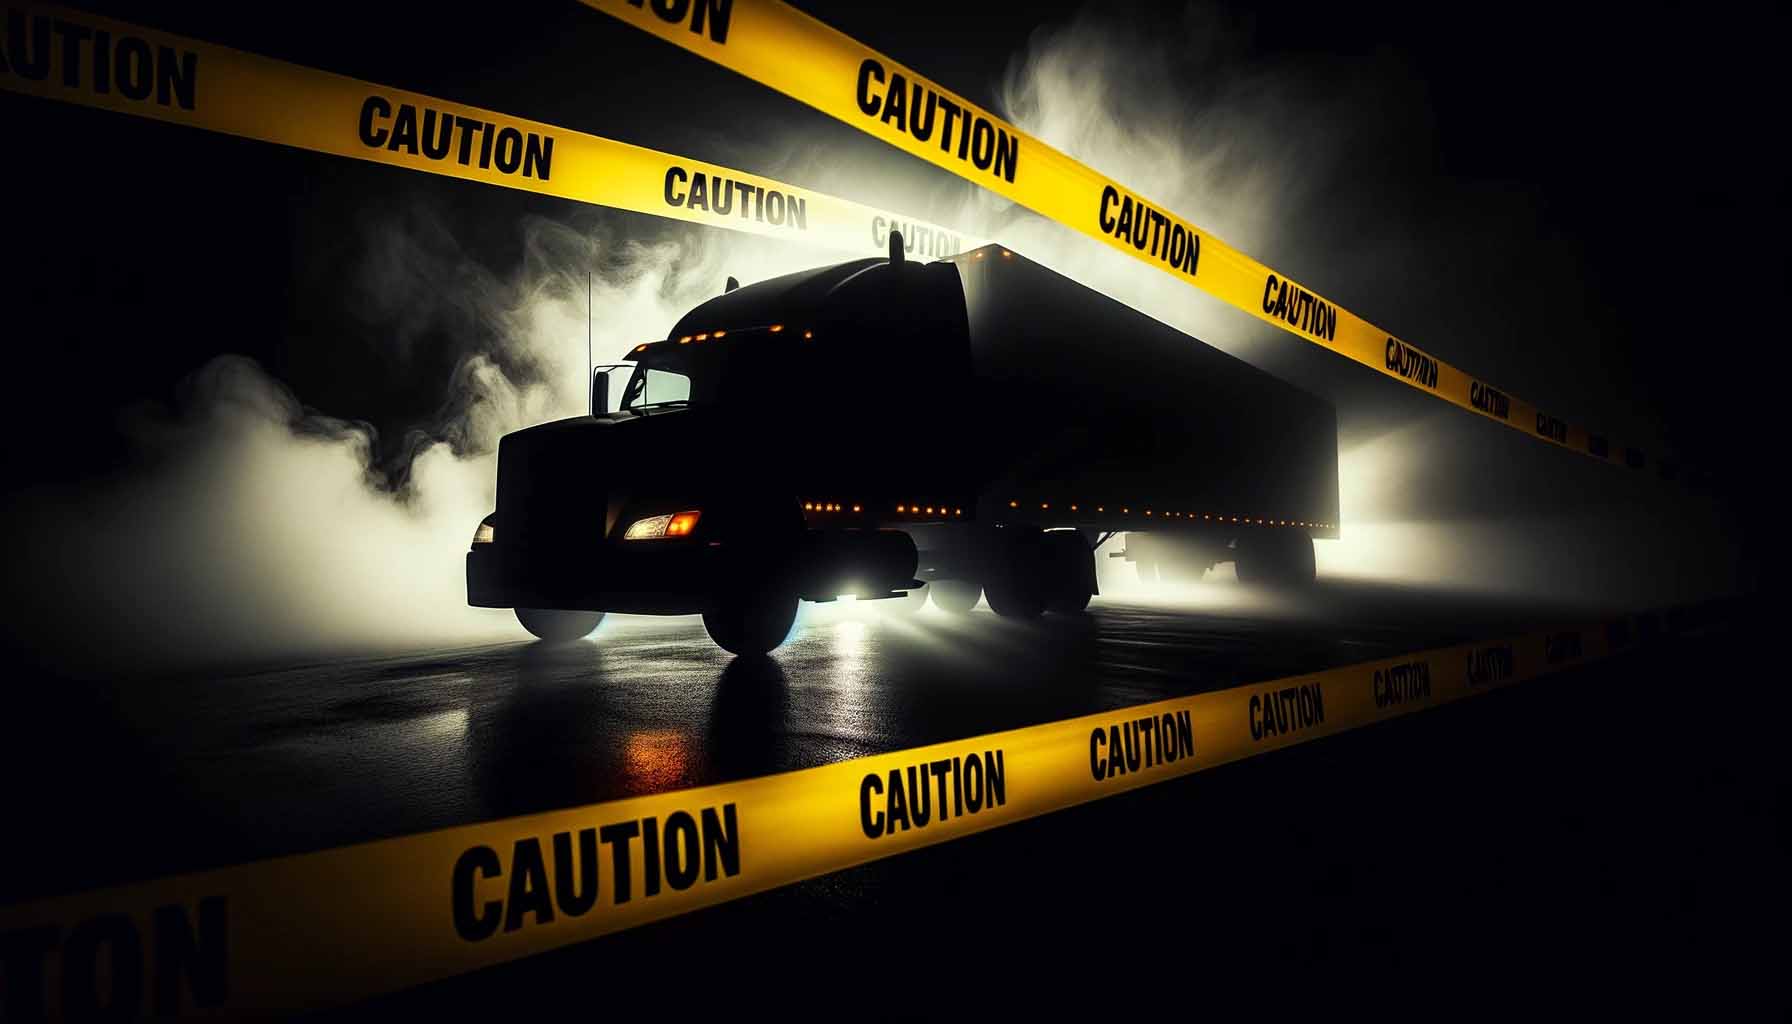 An image of a truck's silhouette overlaid or bordered by yellow caution tape.